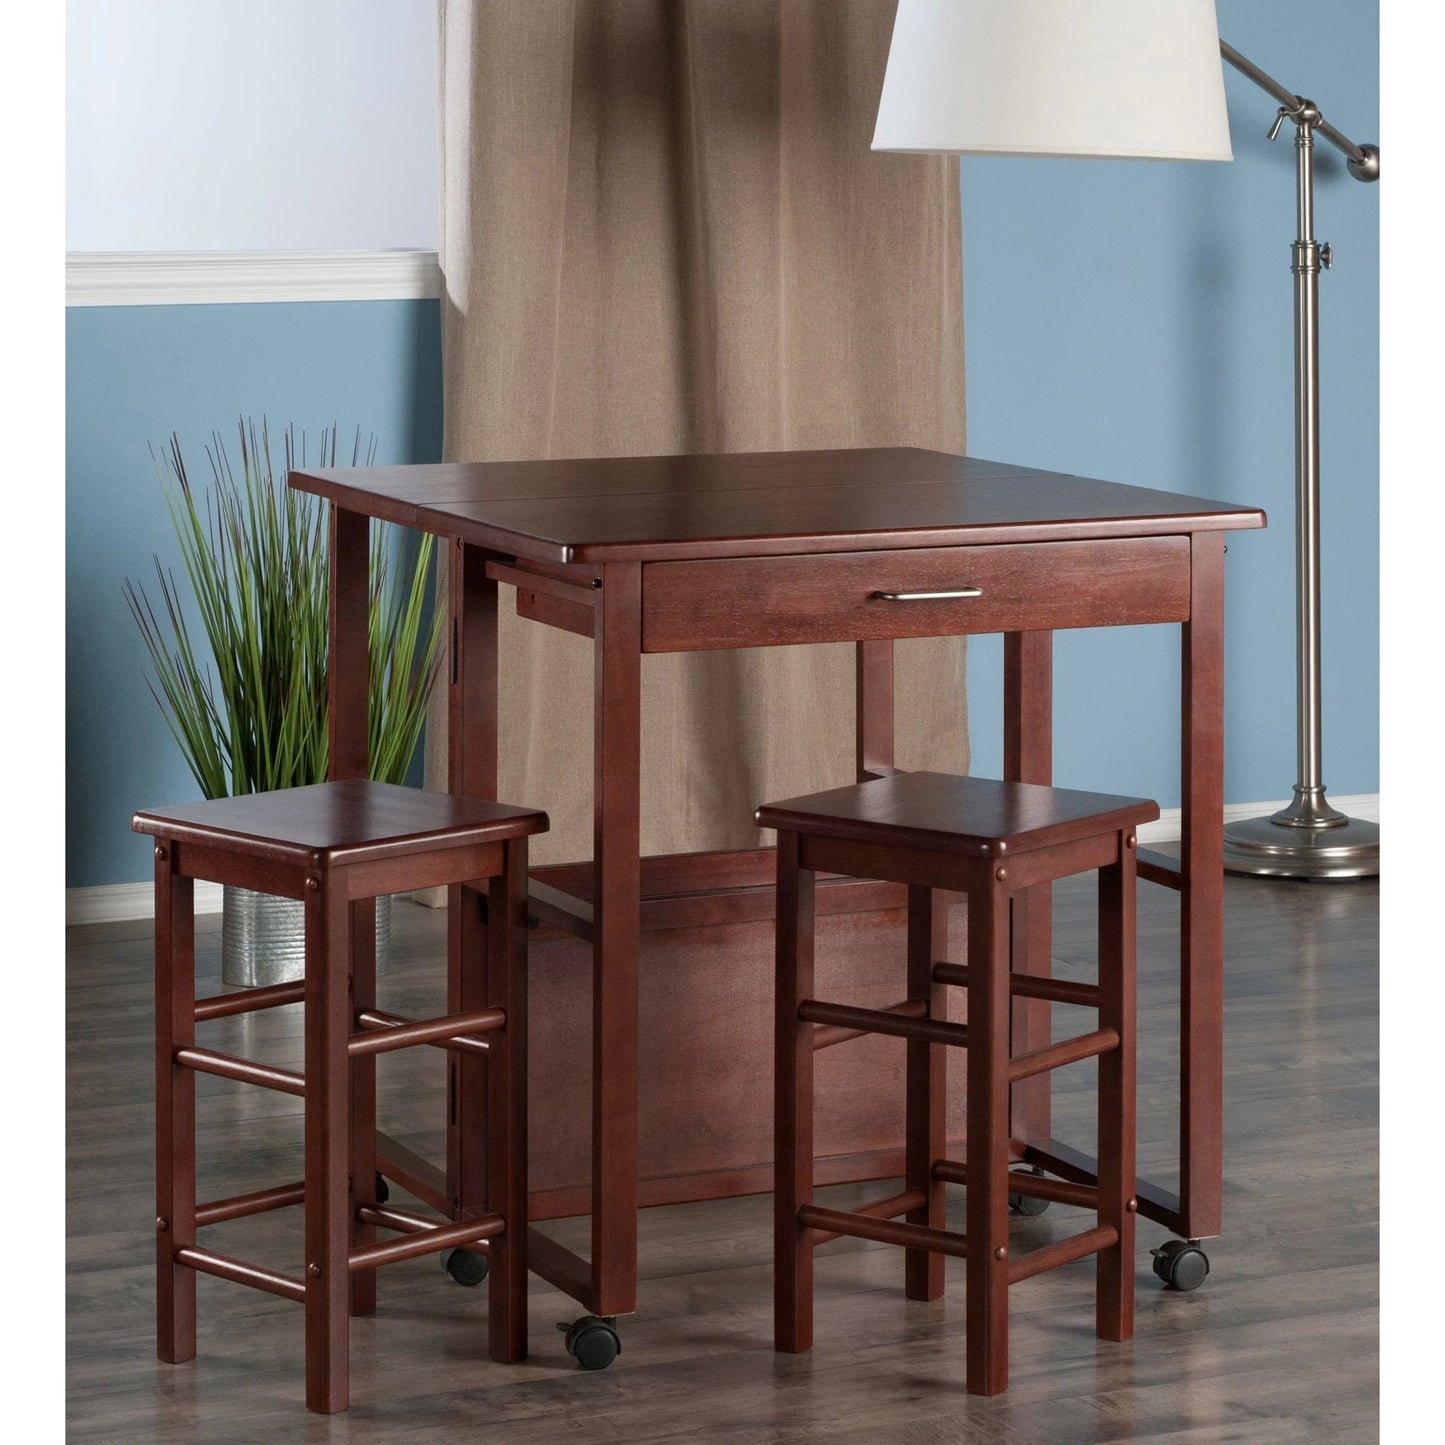 WINSOME Pub Table Set Fremont 3-Pc Space Saver with Tuck-away Stools, Walnut